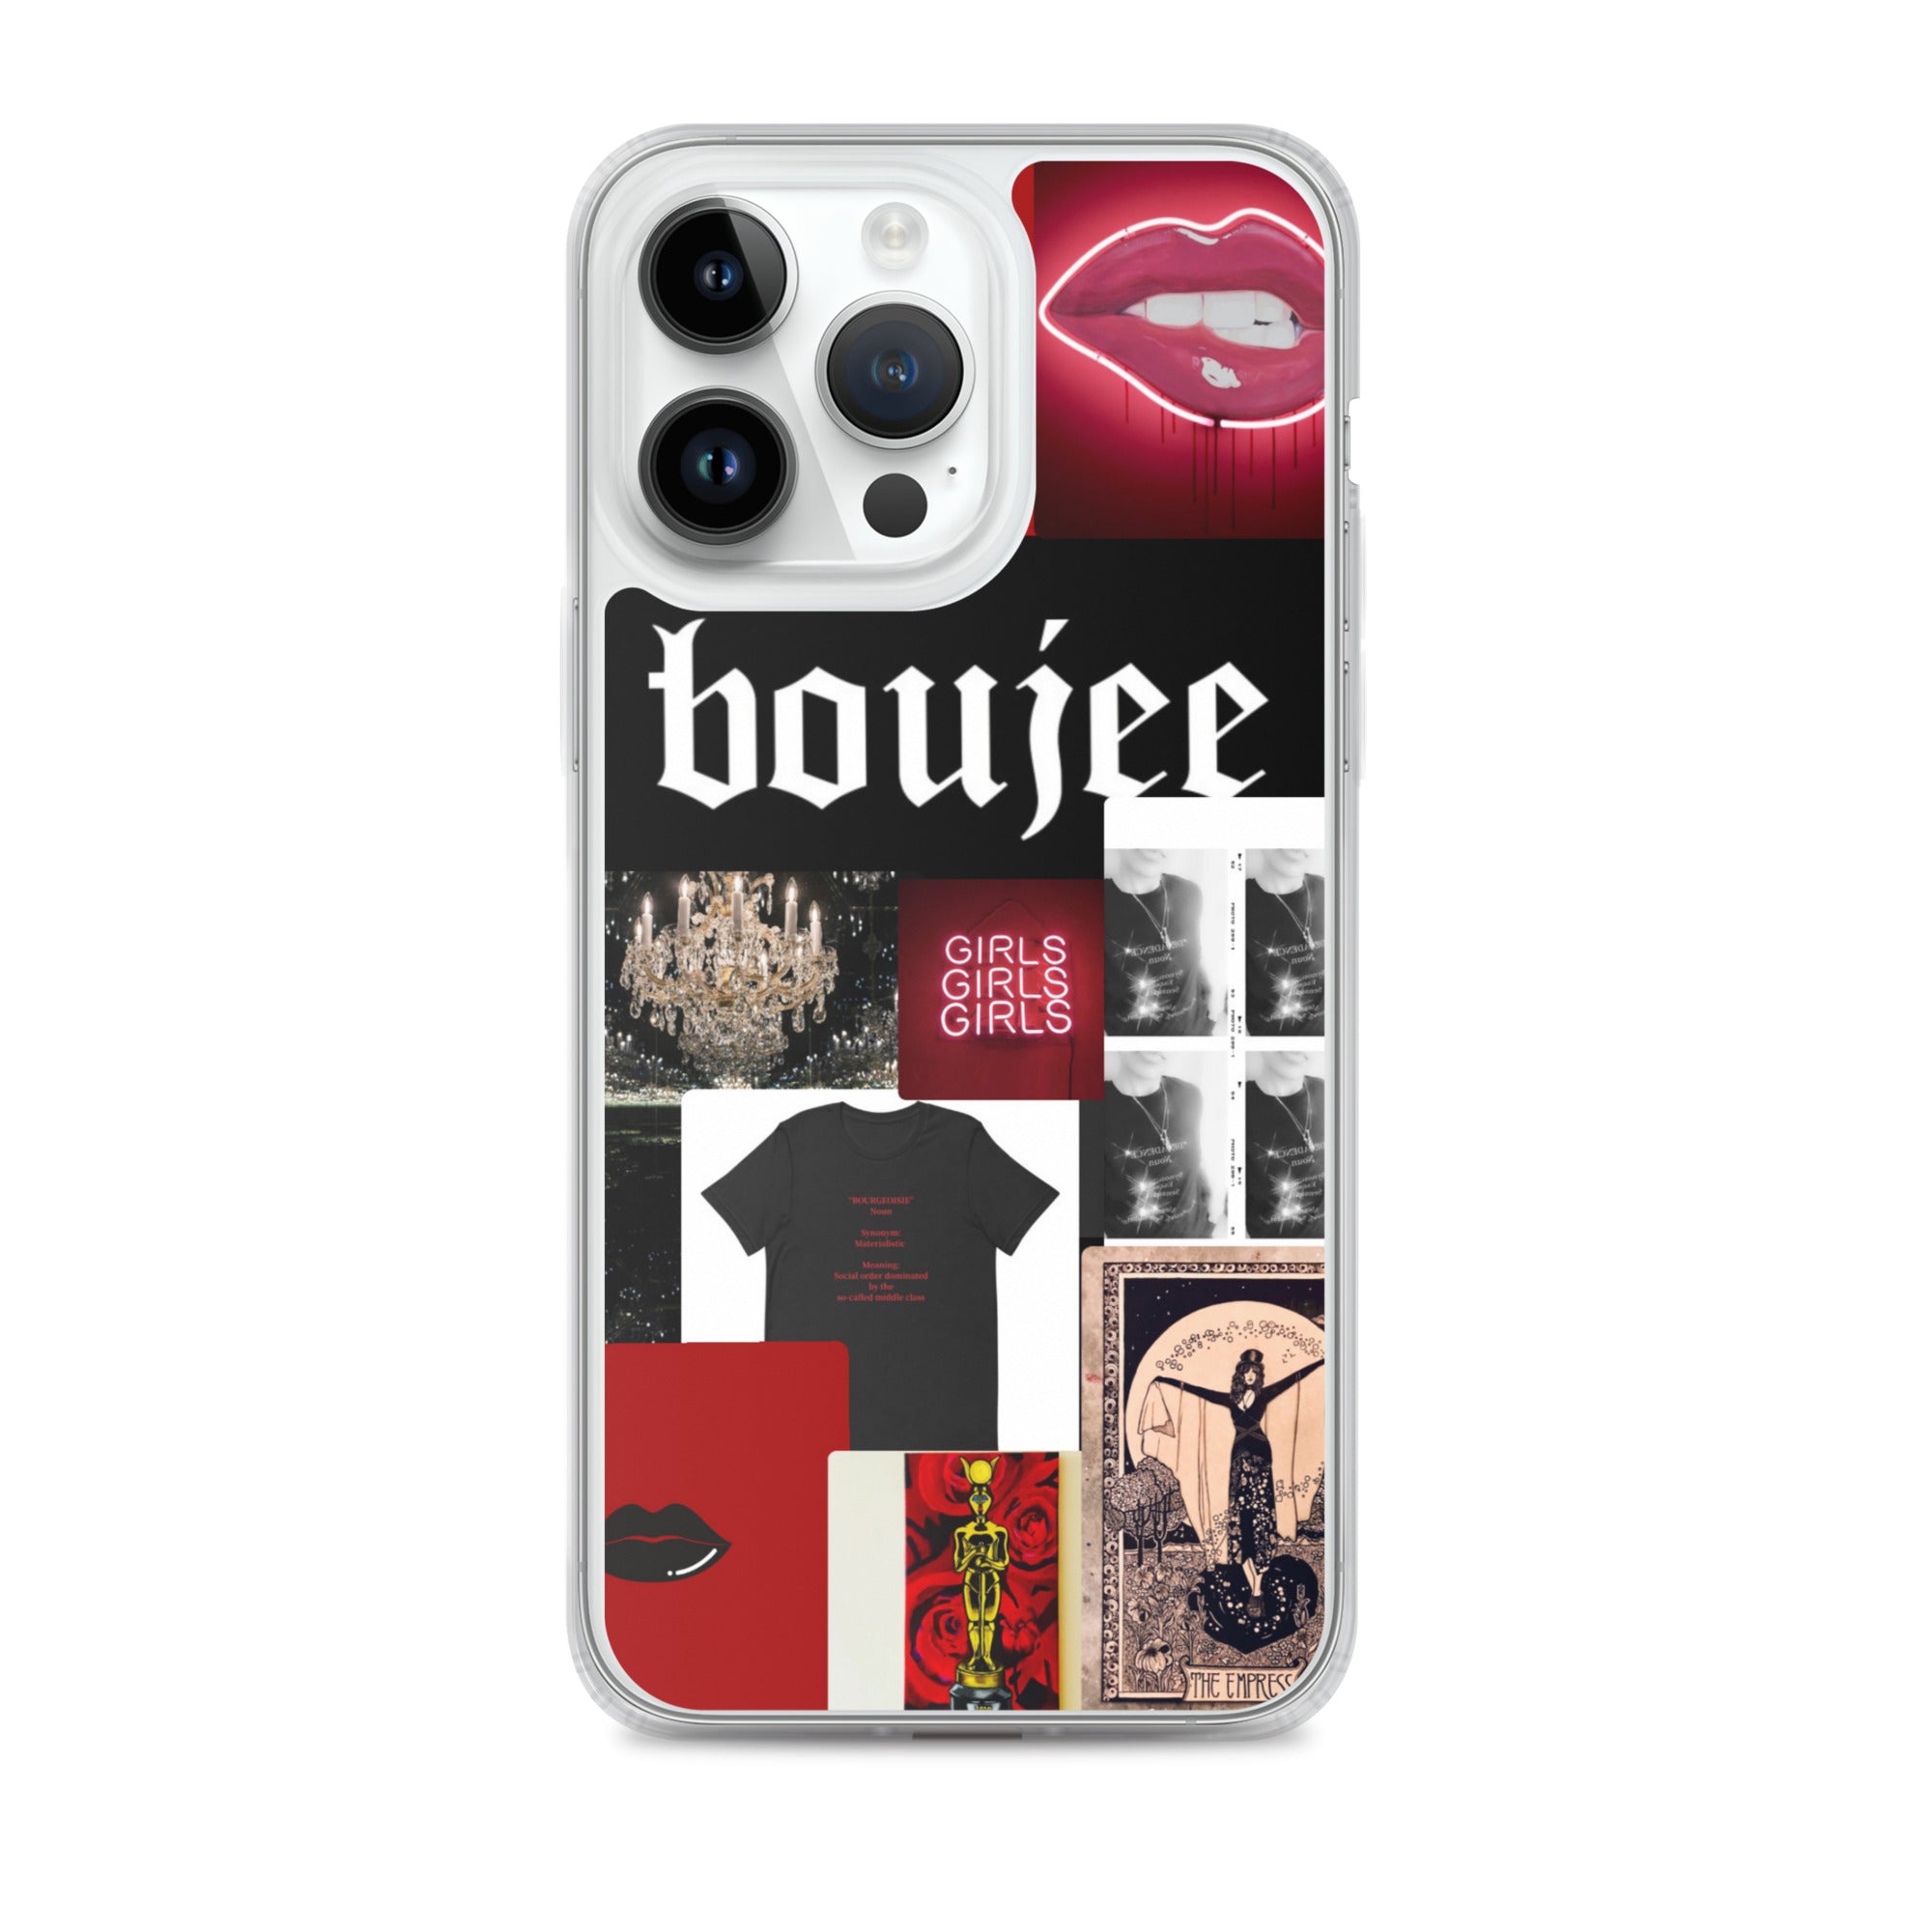 Boujee iPhone Cases for Sale